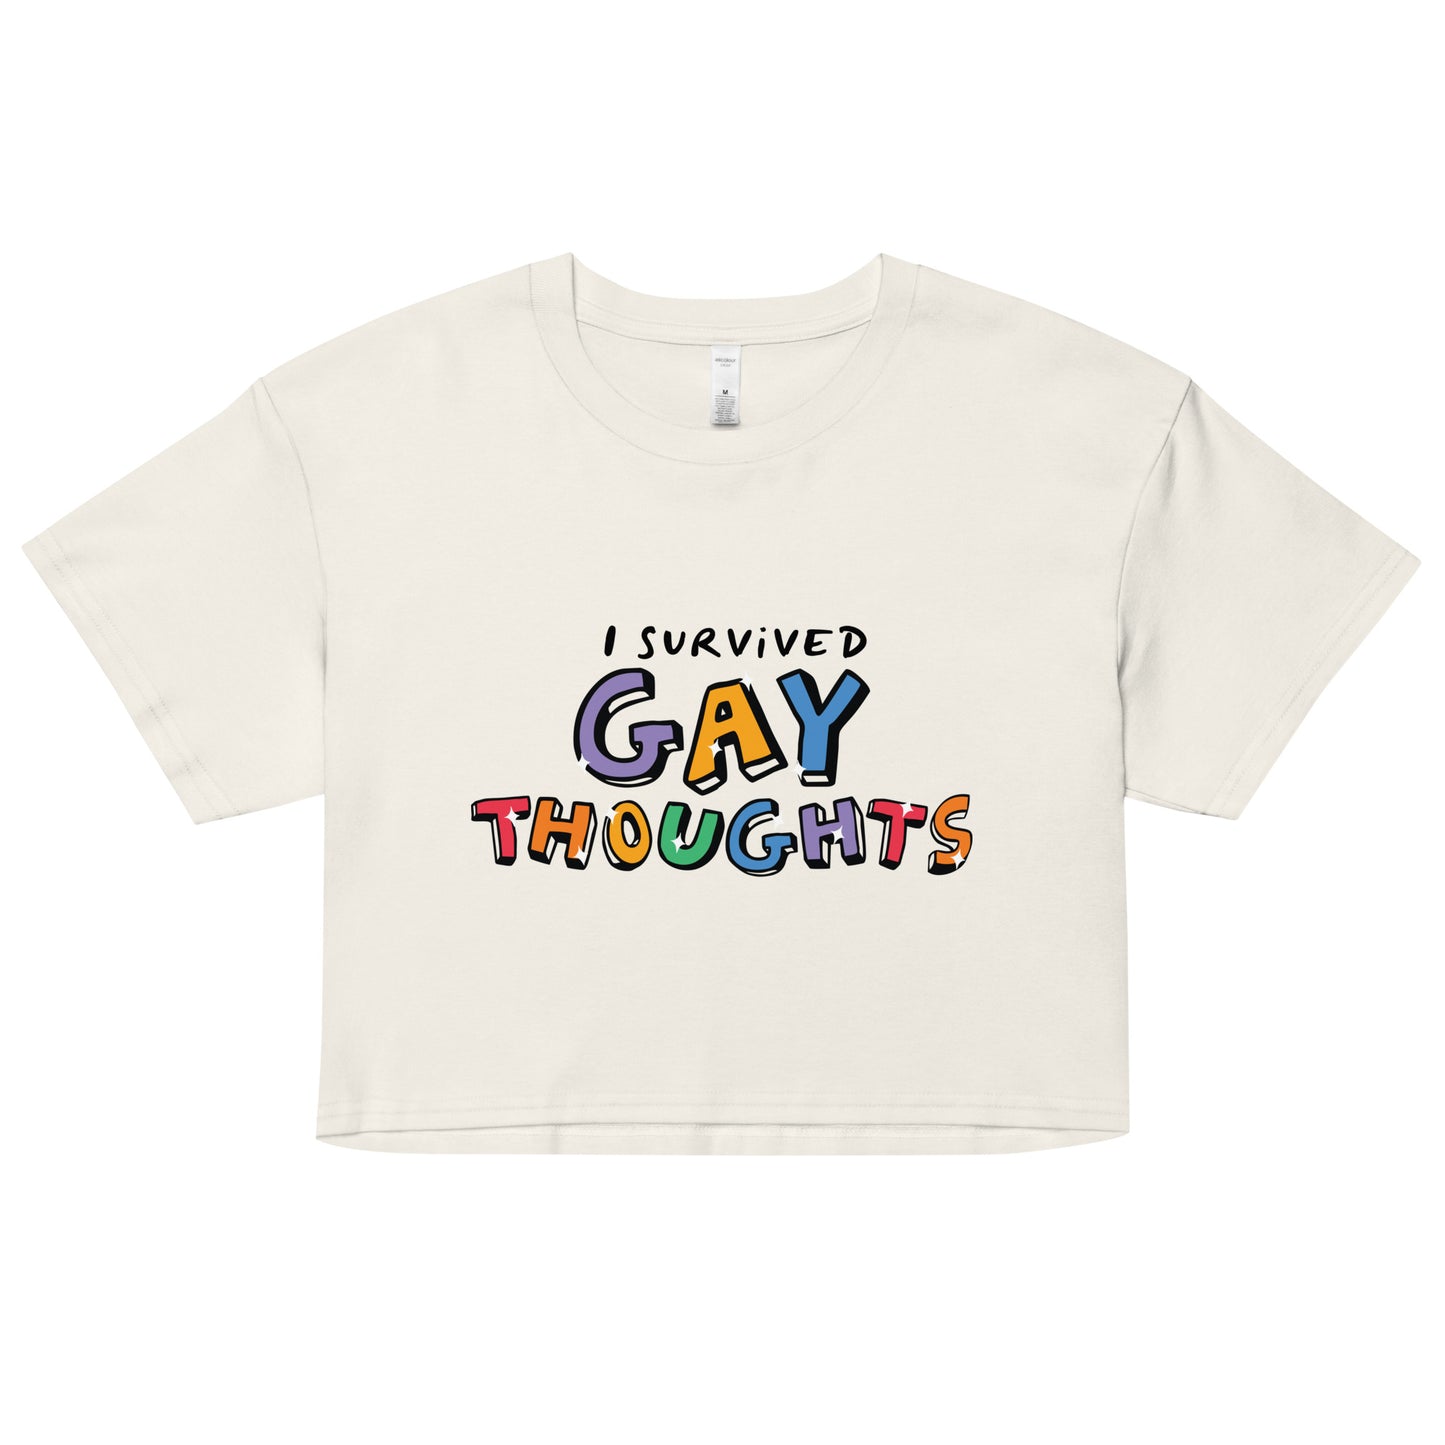 I Survived Gay Thoughts Women’s crop top